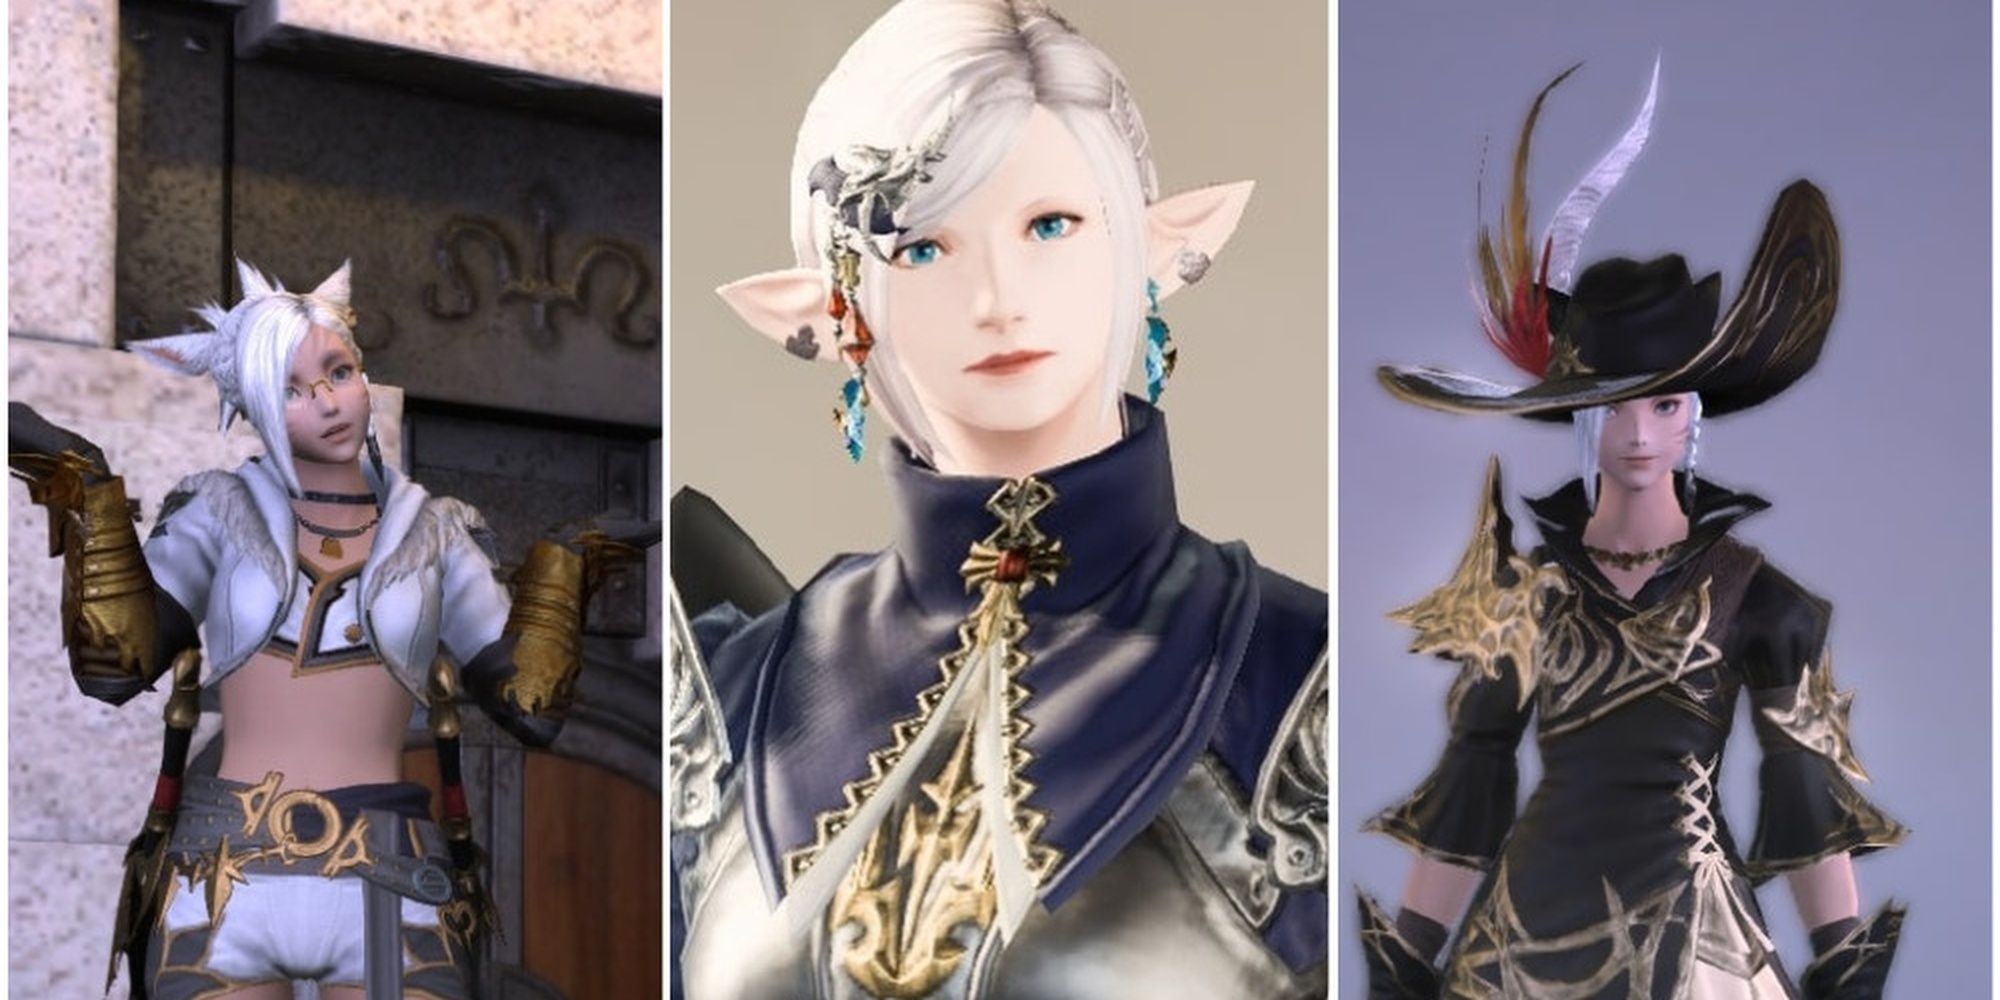 Final Fantasy 14 Glamour Split Image Three Characters: One shrugging Miqo'te, one Elezen in Holy Knight Gear and one Miqo'te in Forgiven Gear